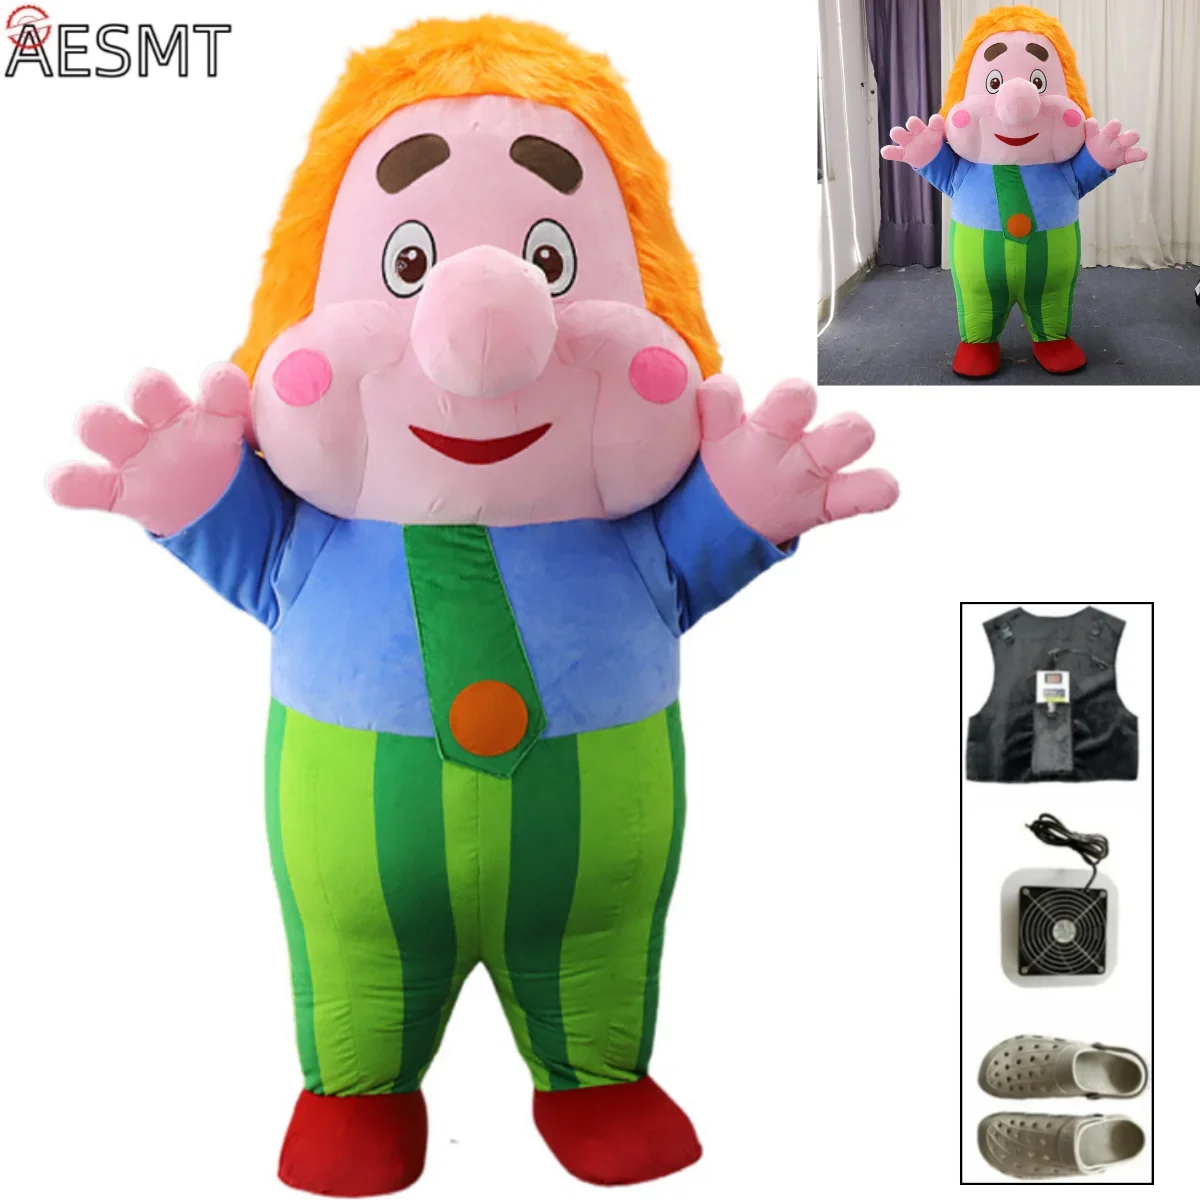 

260cm Inflatable Karlsson Costume Large Wearable Plush Cartoon Doll Mascot, Party Event Promotion and Performance Costumes